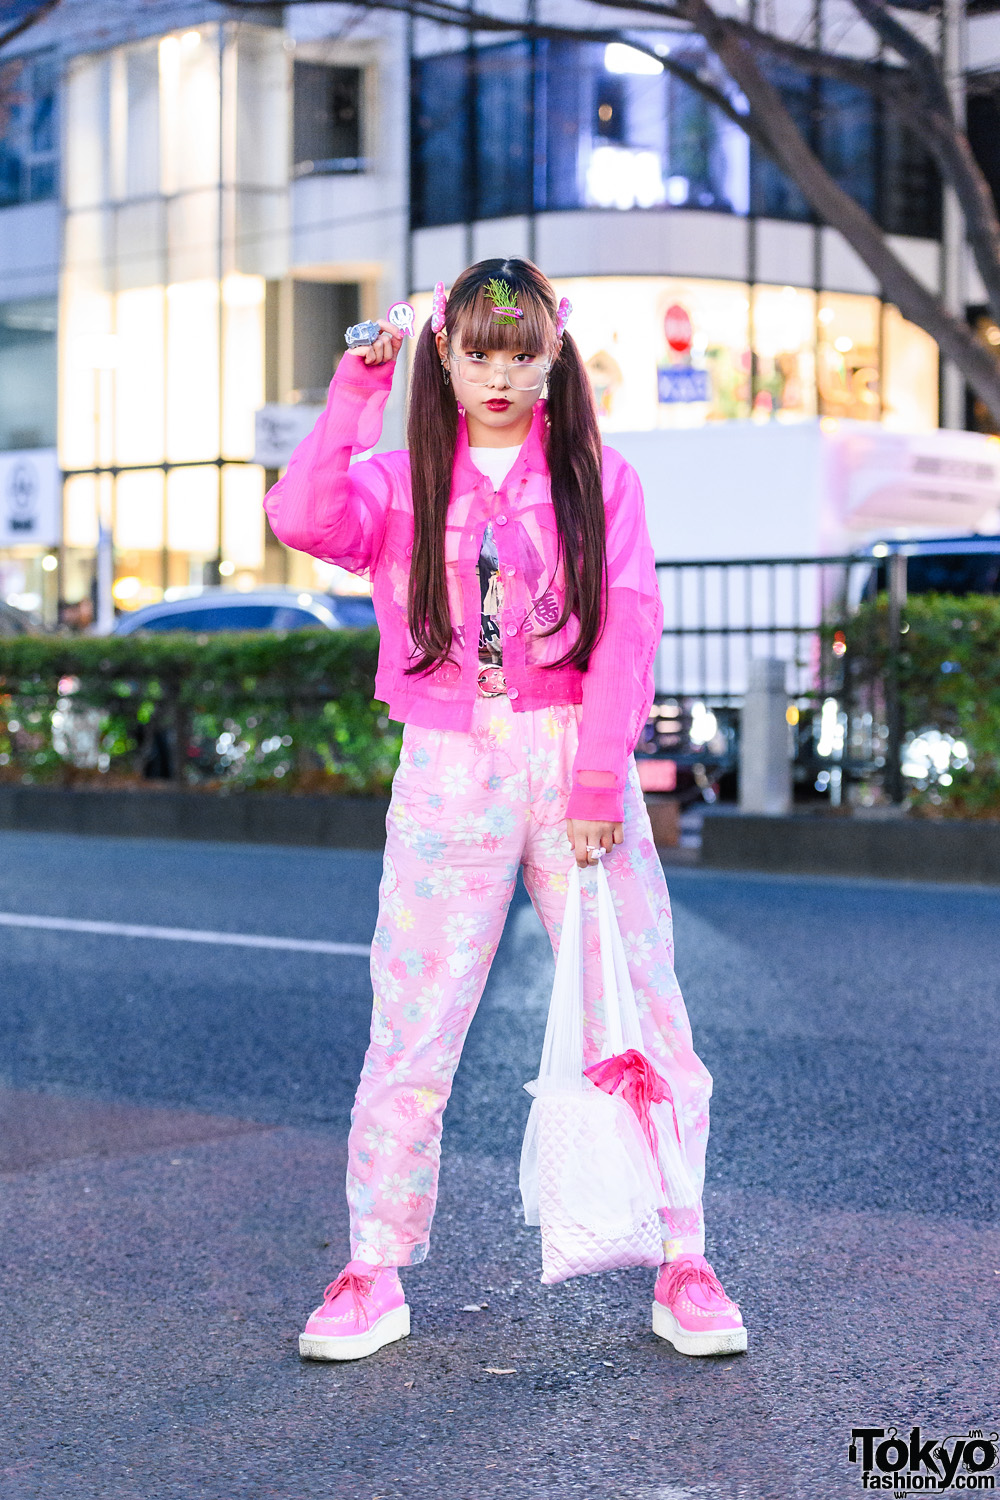 Pink & White Street Style w/ Twin Tails, Hair Clips, Forever21 Sheer Jacket, Hello Kitty Pajama Pants, Rosary Necklace, Kamen Rider & Pokemon Rings, Quilted Bag & Yosuke Pink Creepers